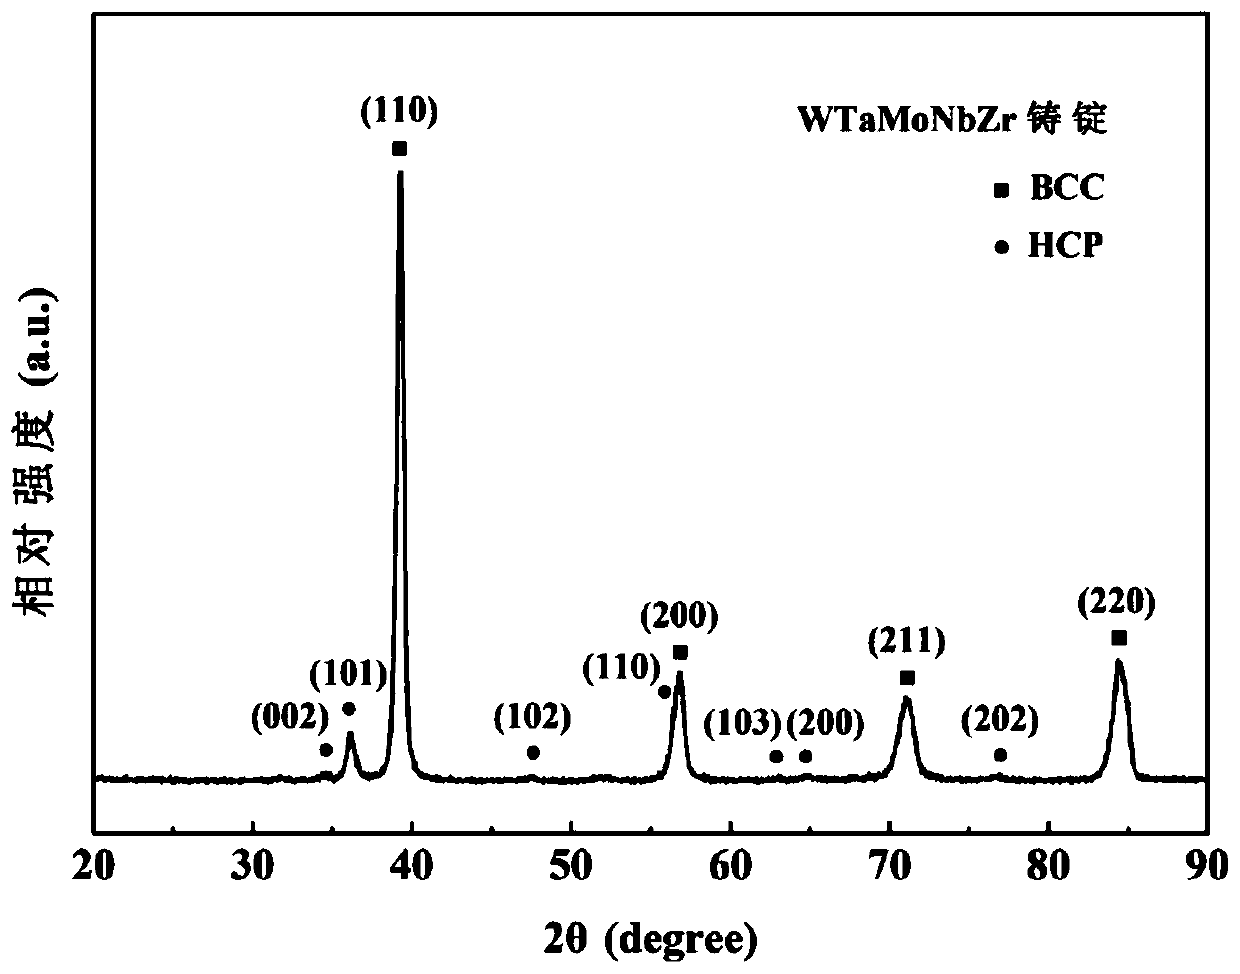 W-Ta-Mo-Nb-Zr high-temperature high-entropy alloy and preparation method thereof